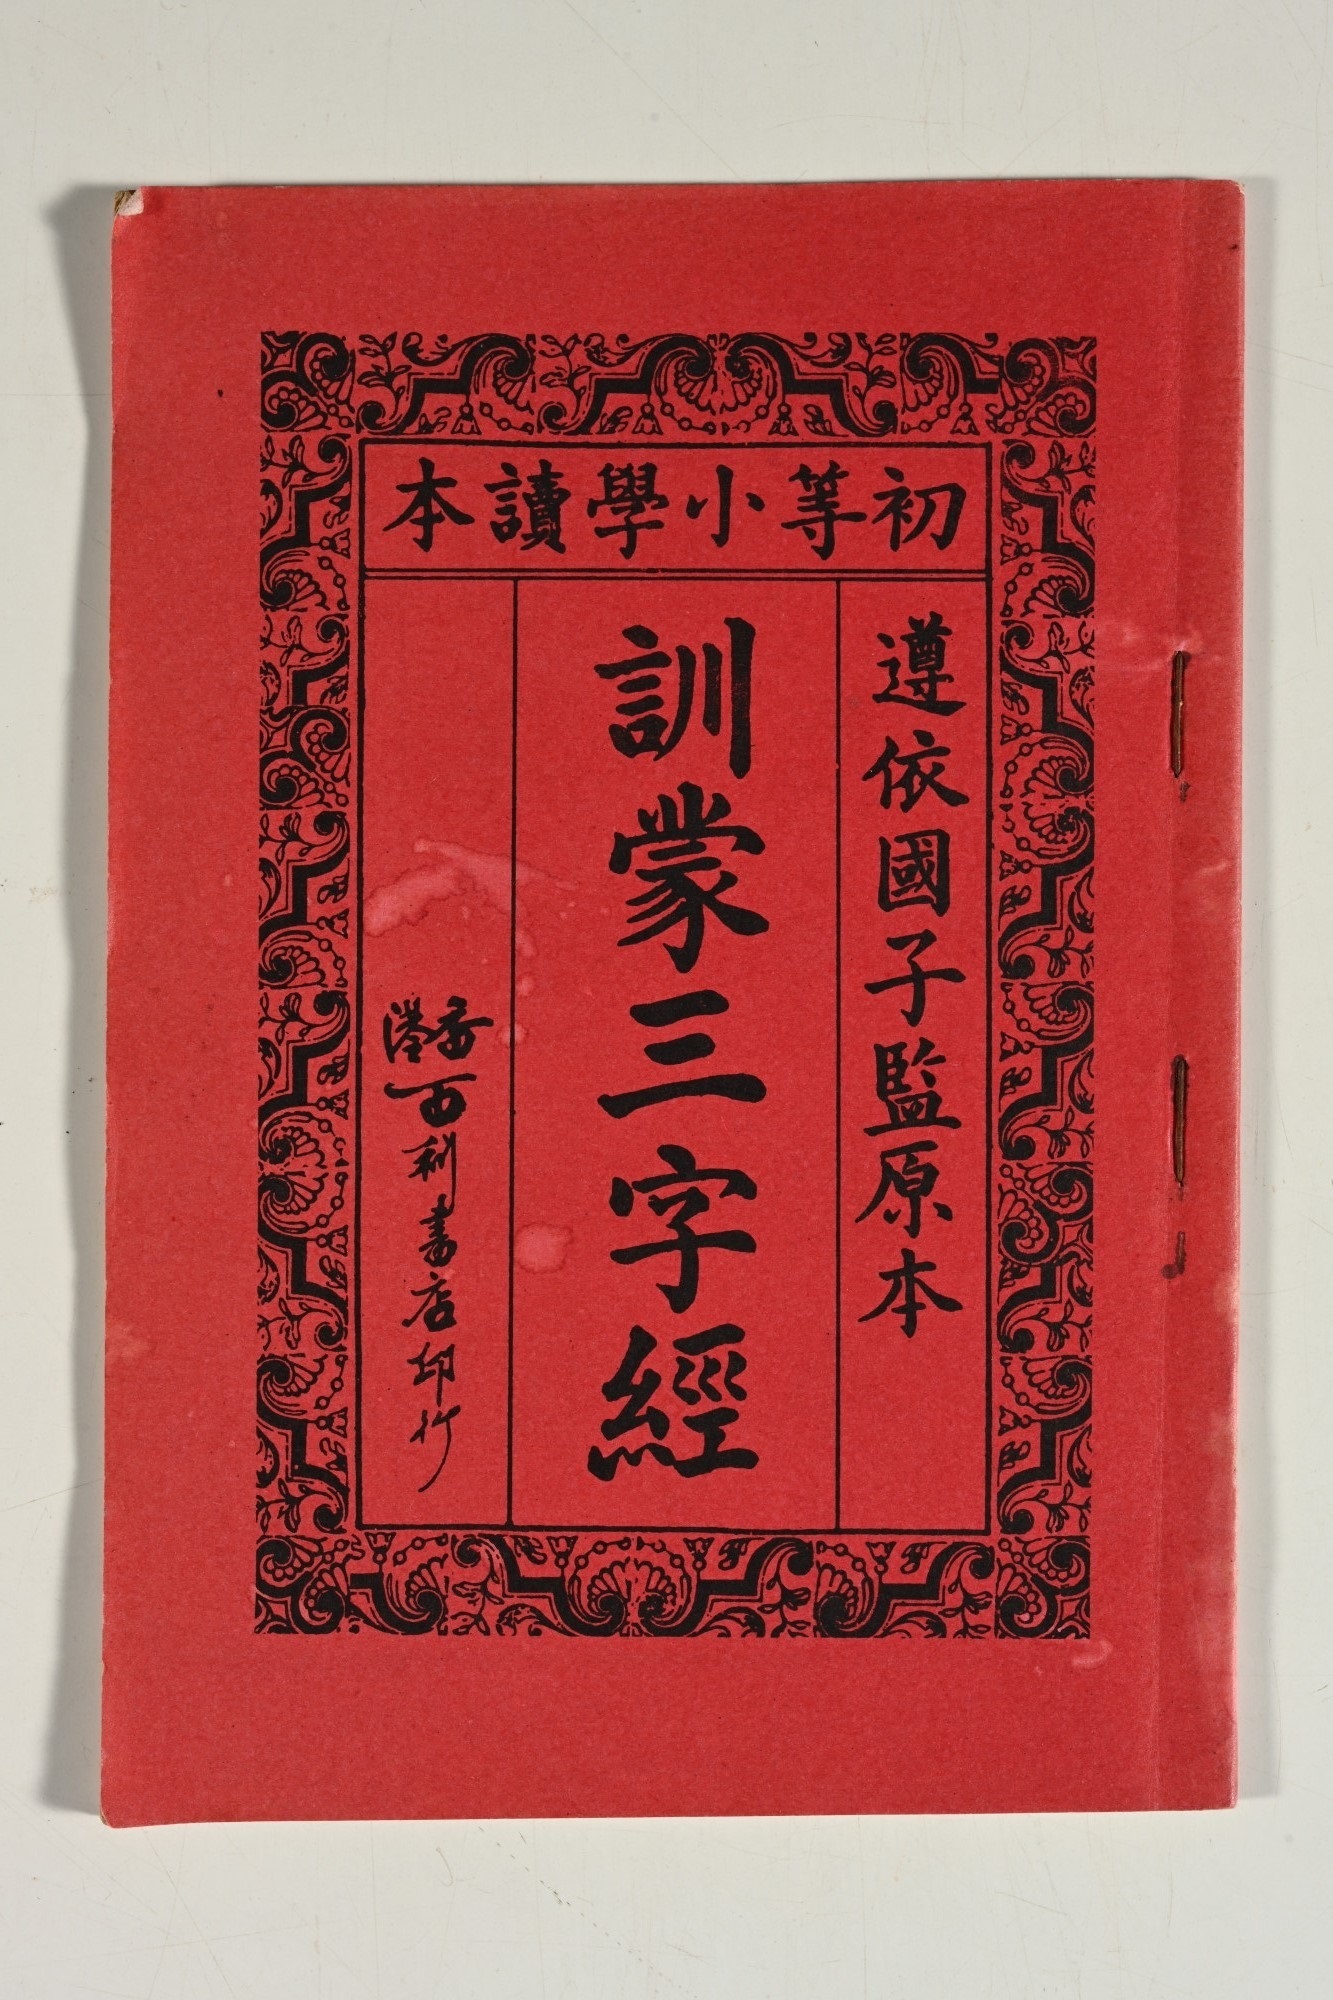 <em>Xunmeng Sanzijing</em> (<em>"Three Character Classic</em> for early learners"), printed by Pak Lei Bookstore of Hong Kong, 1930s. <br> Mr Willie Chung collection